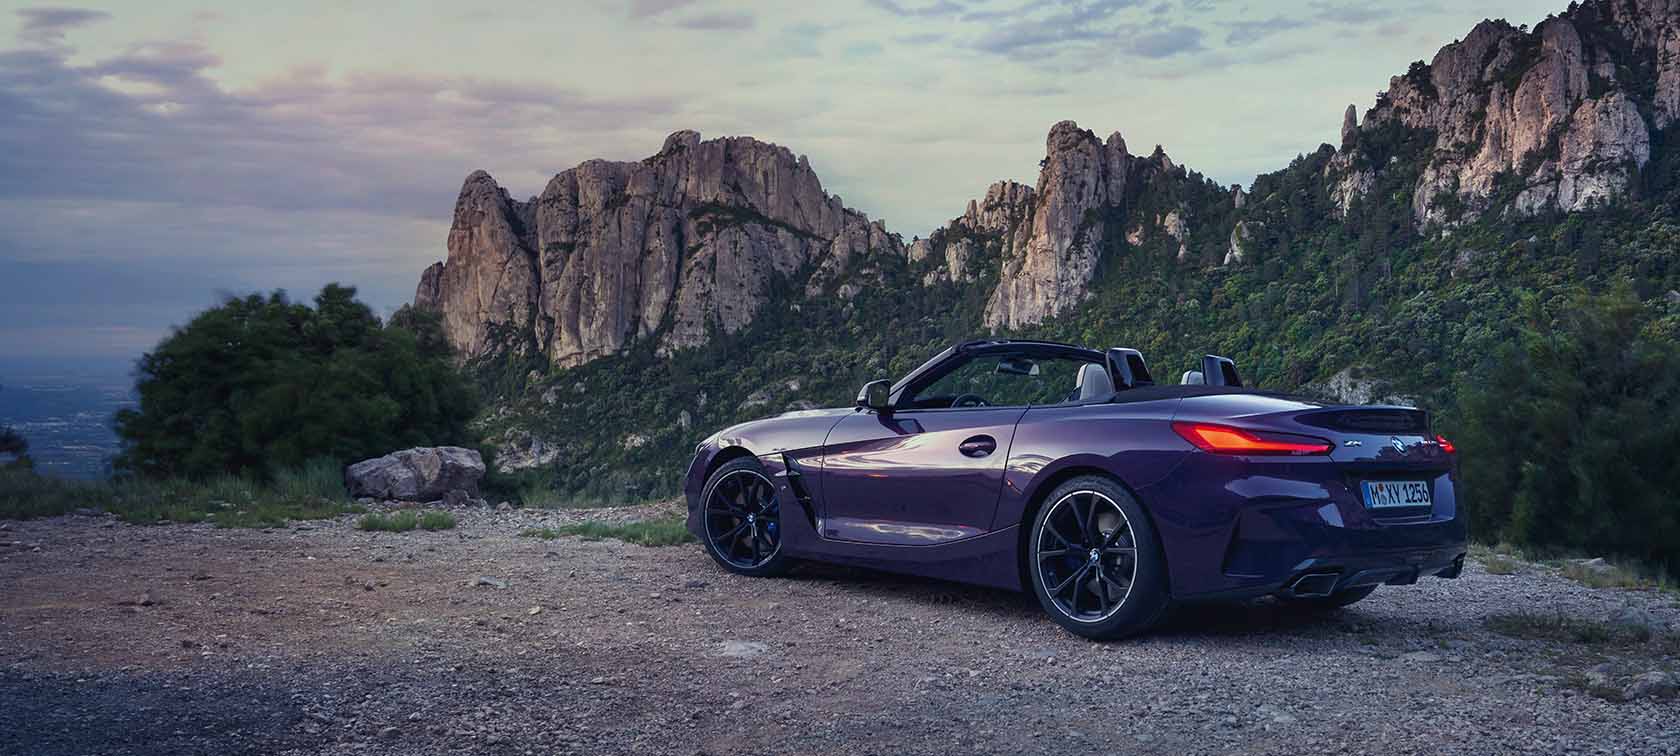 BMW Z4 Roadster (G29): Models, technical data & prices | BMW.cc